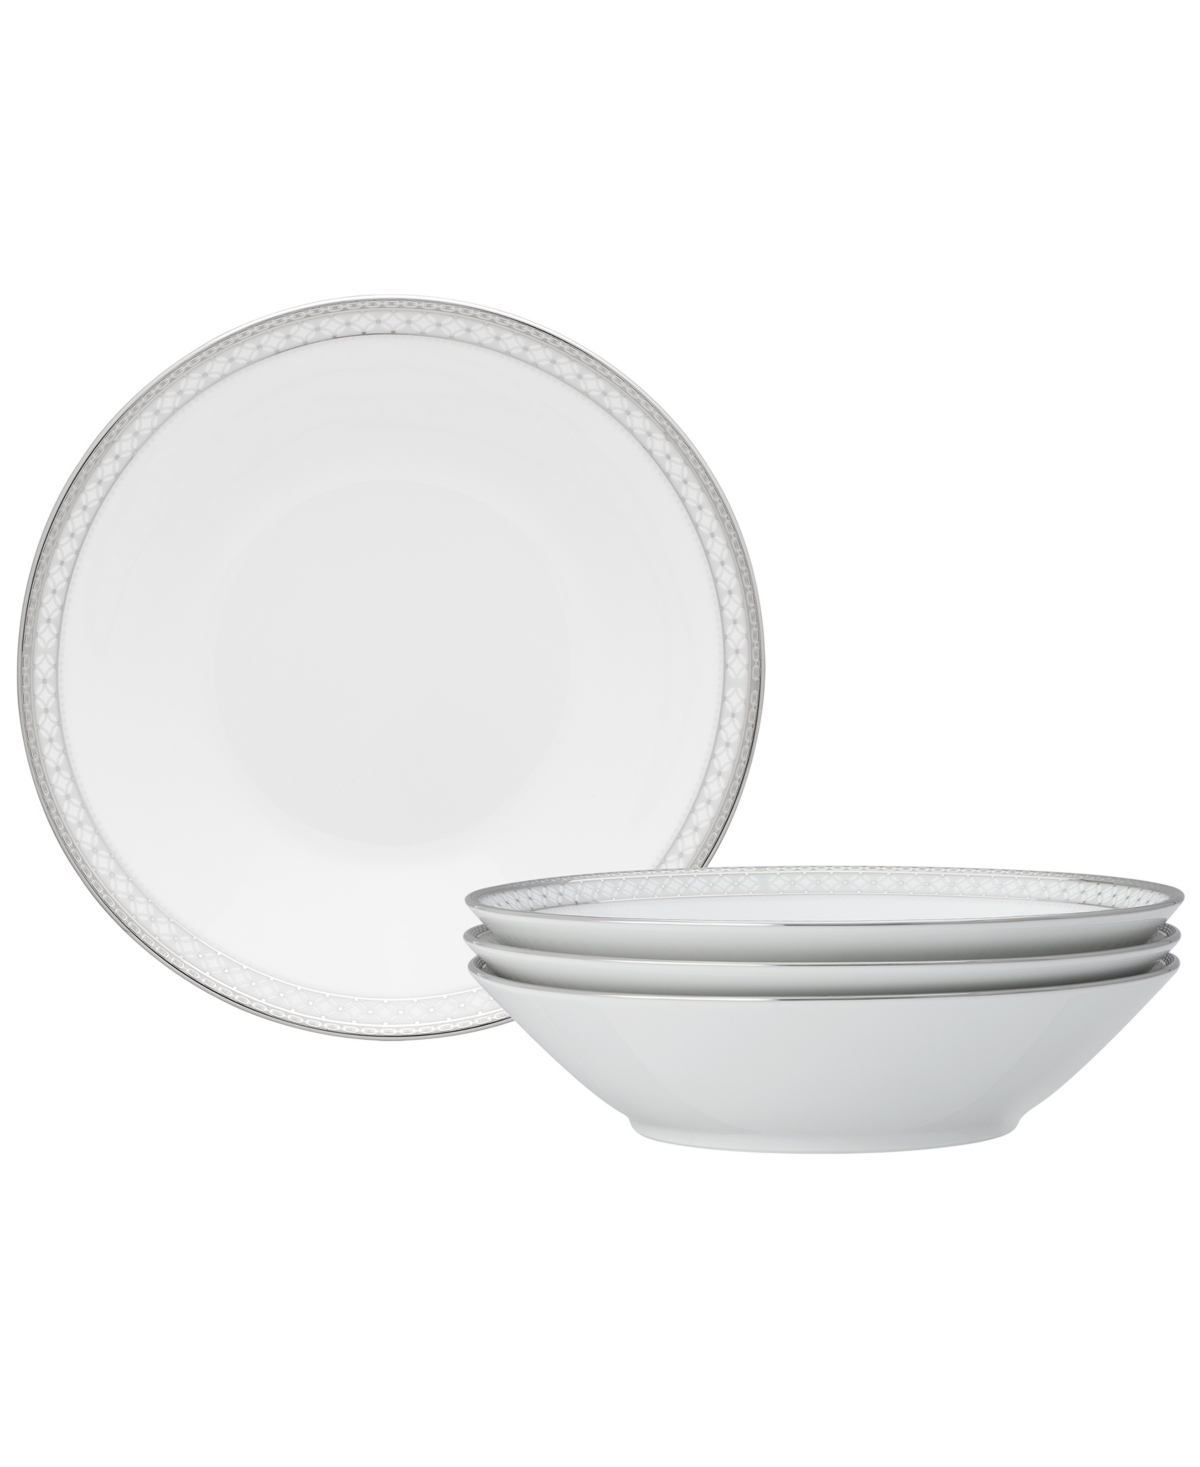 Noritake Rochester Platinum Set Of 4 Soup Bowls, Service For 4 In White